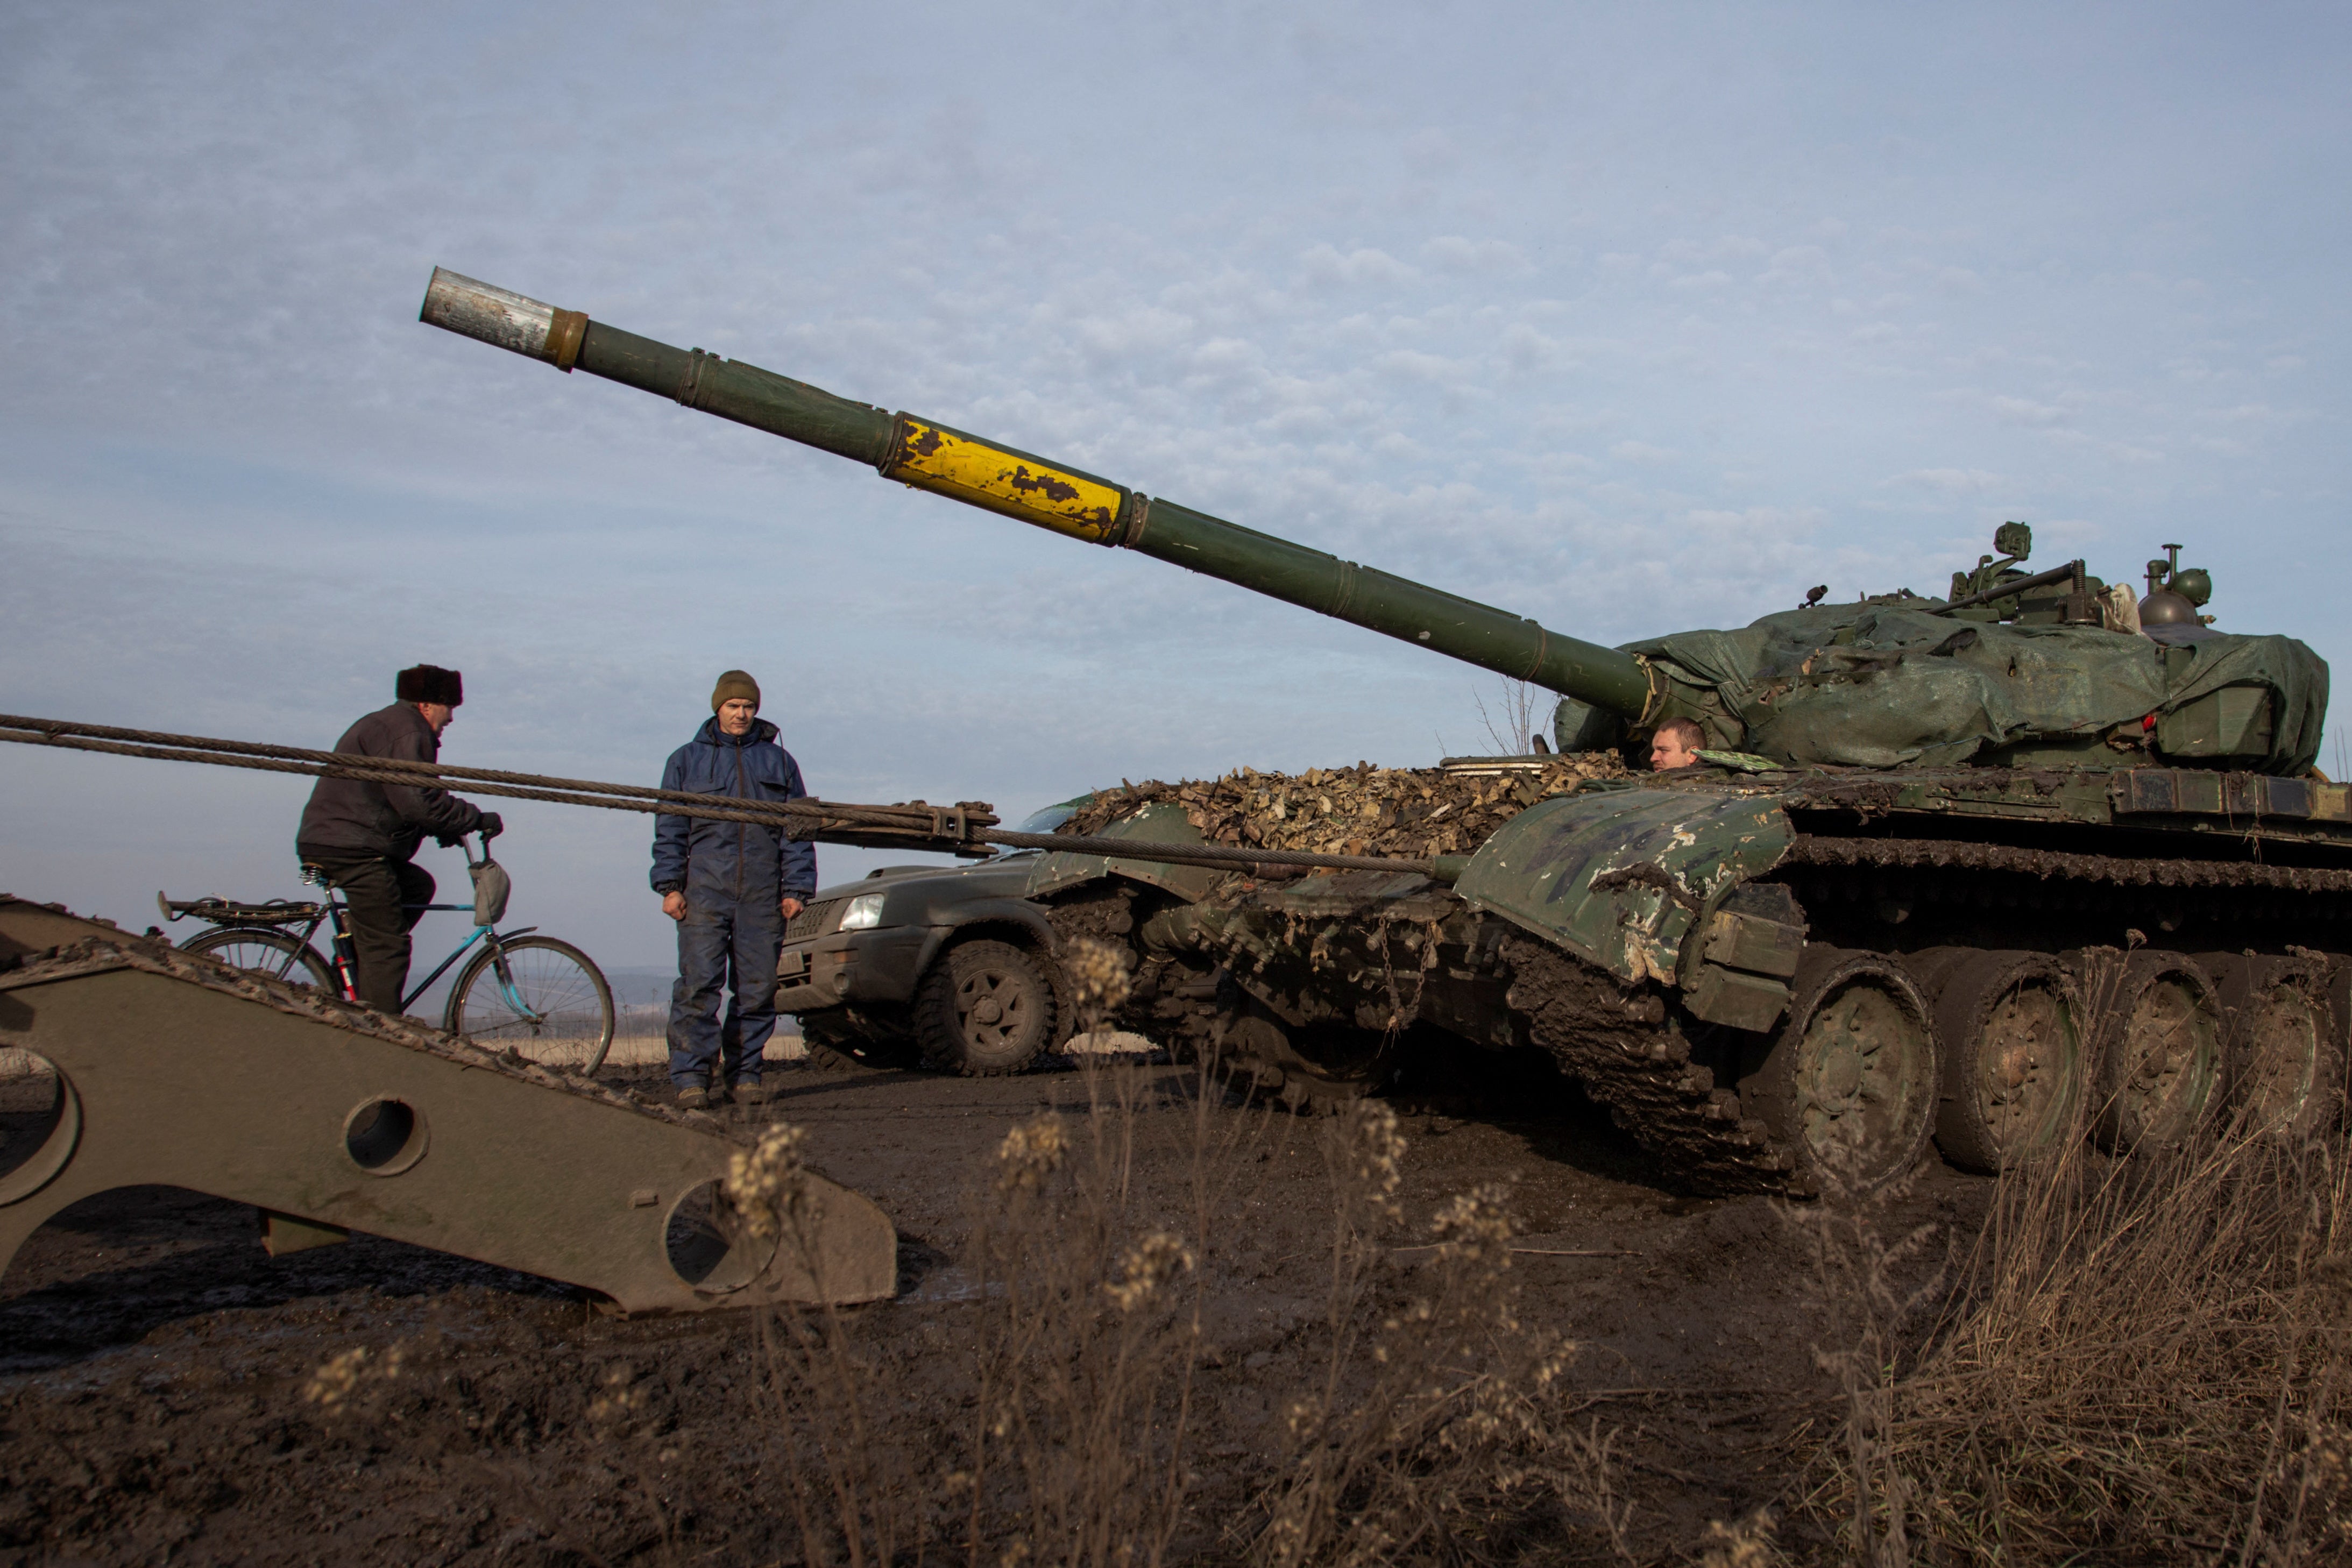 A photo of a tank, and a Ukrainian serviceman, and a man on a bike, in Ukraine.